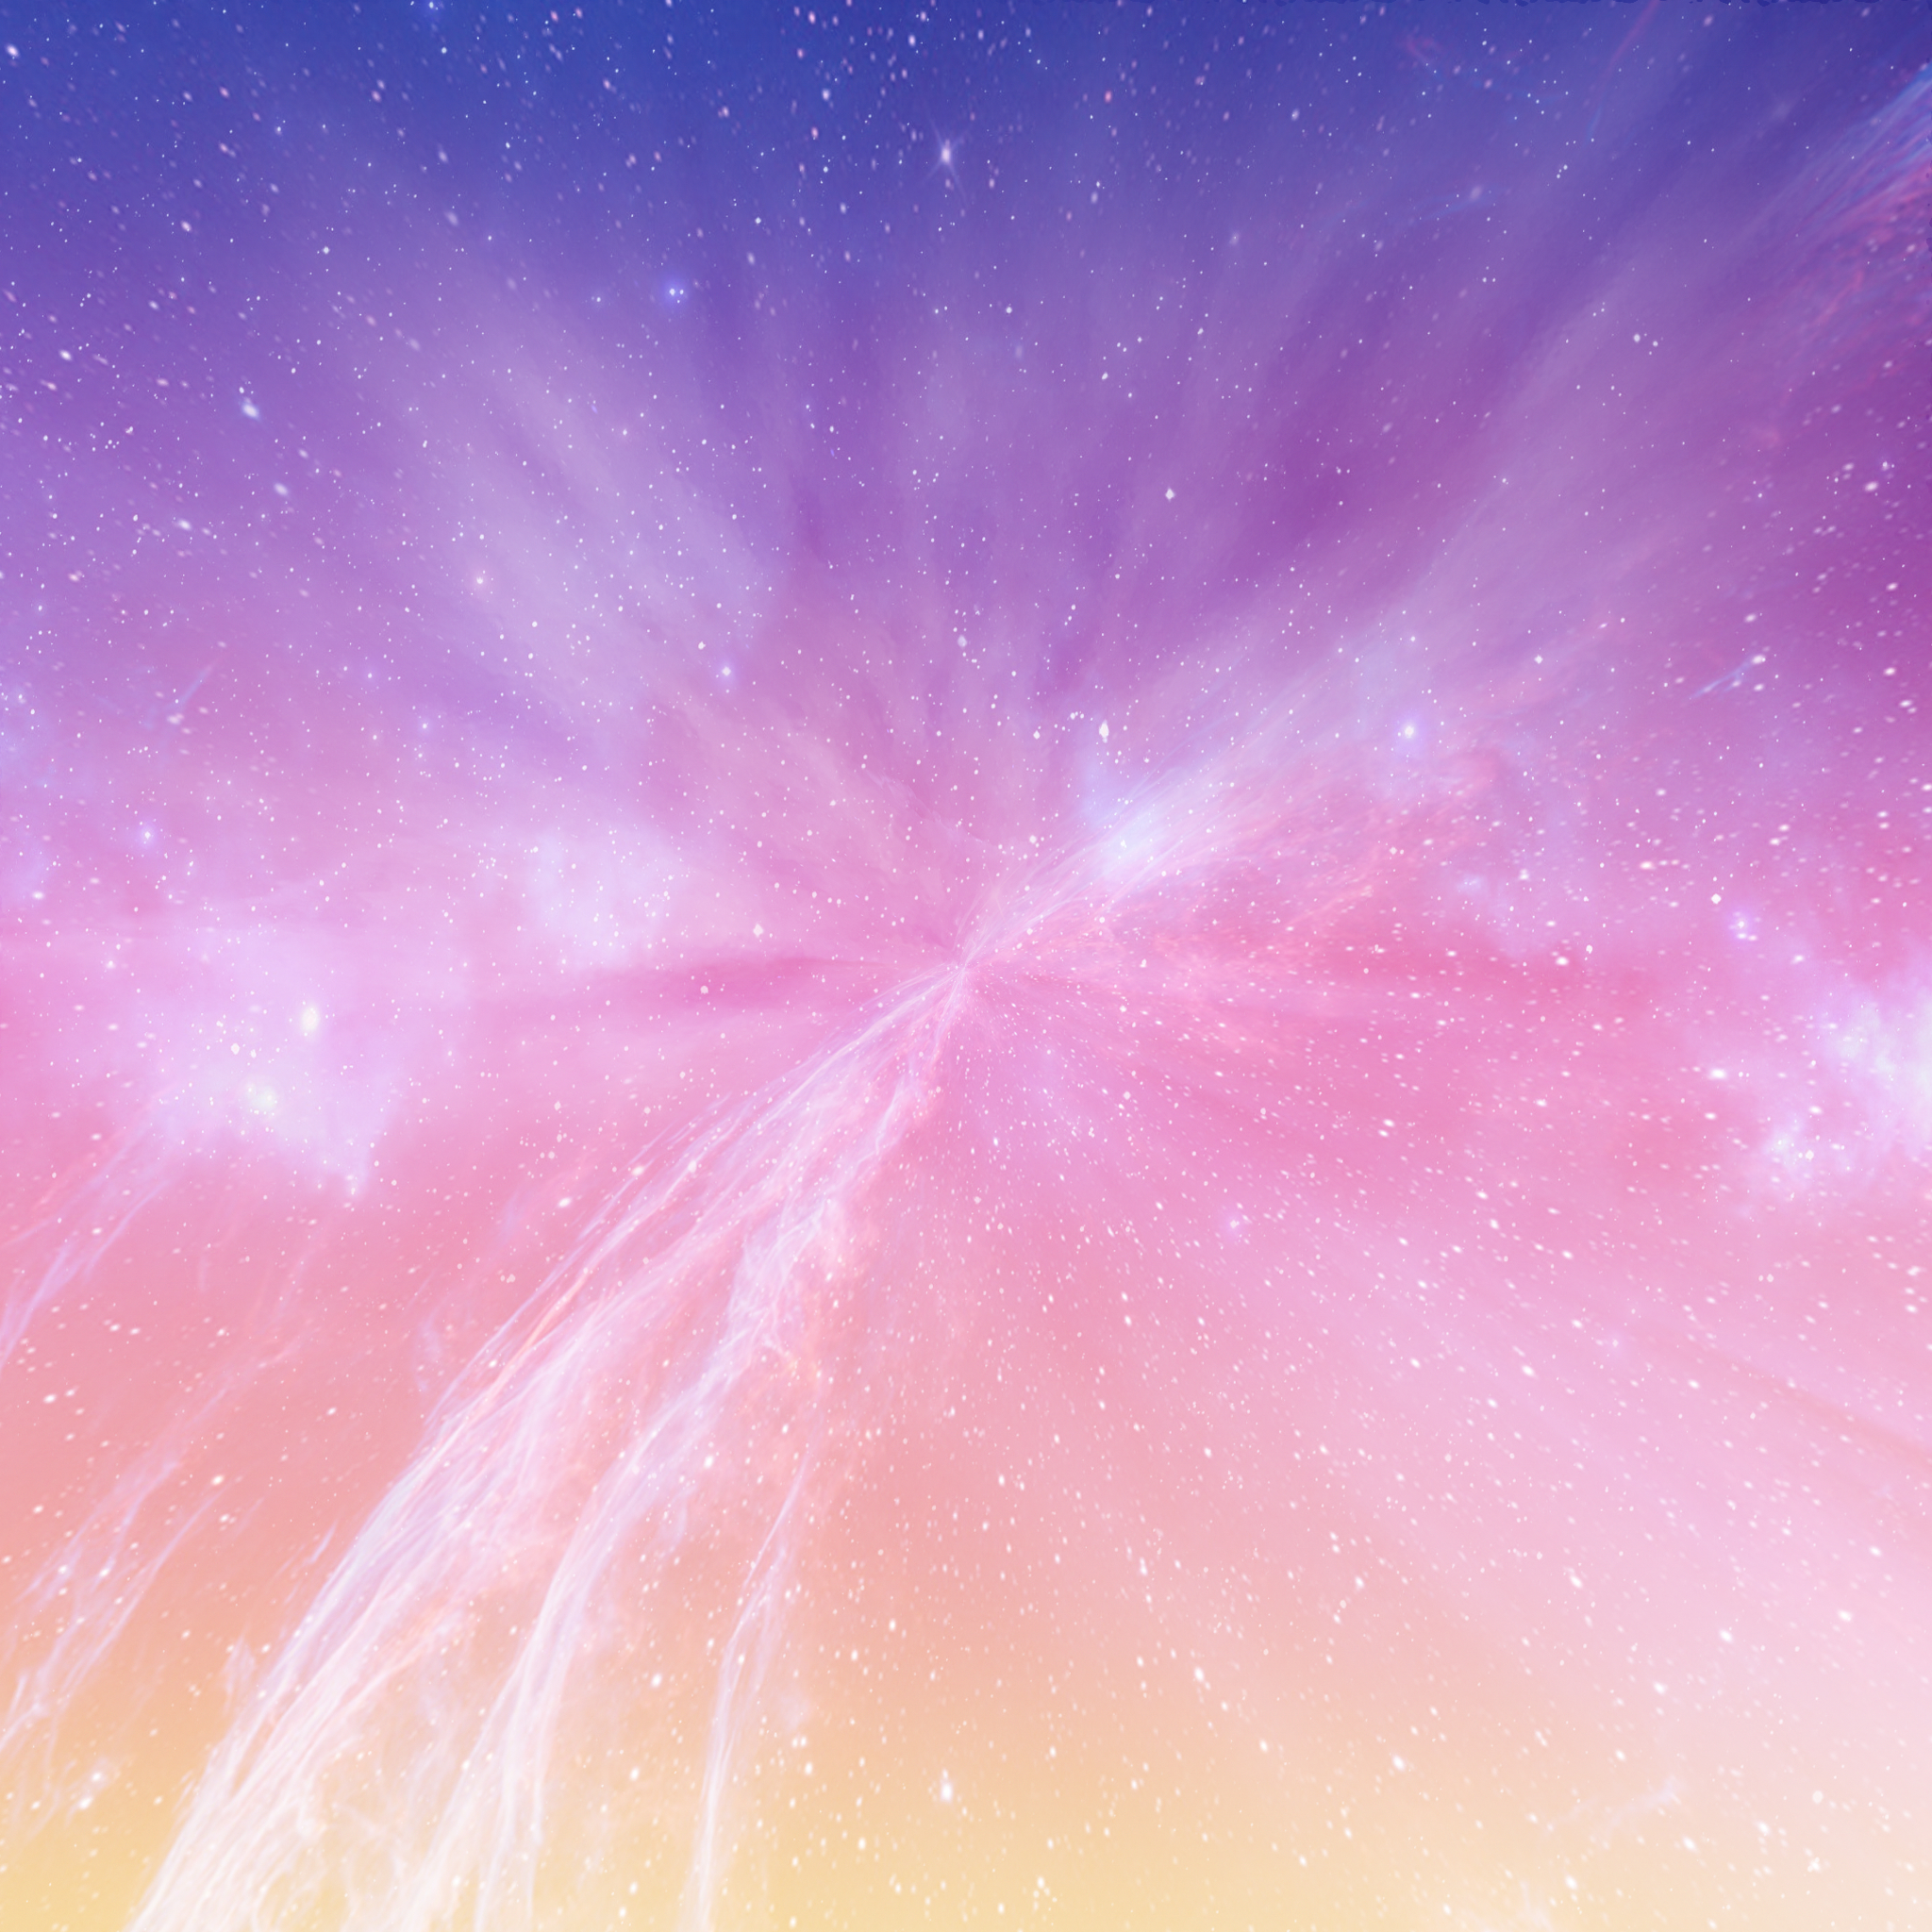 Washed Out Spaced Out - Pastel Cute Galaxy Background , HD Wallpaper & Backgrounds